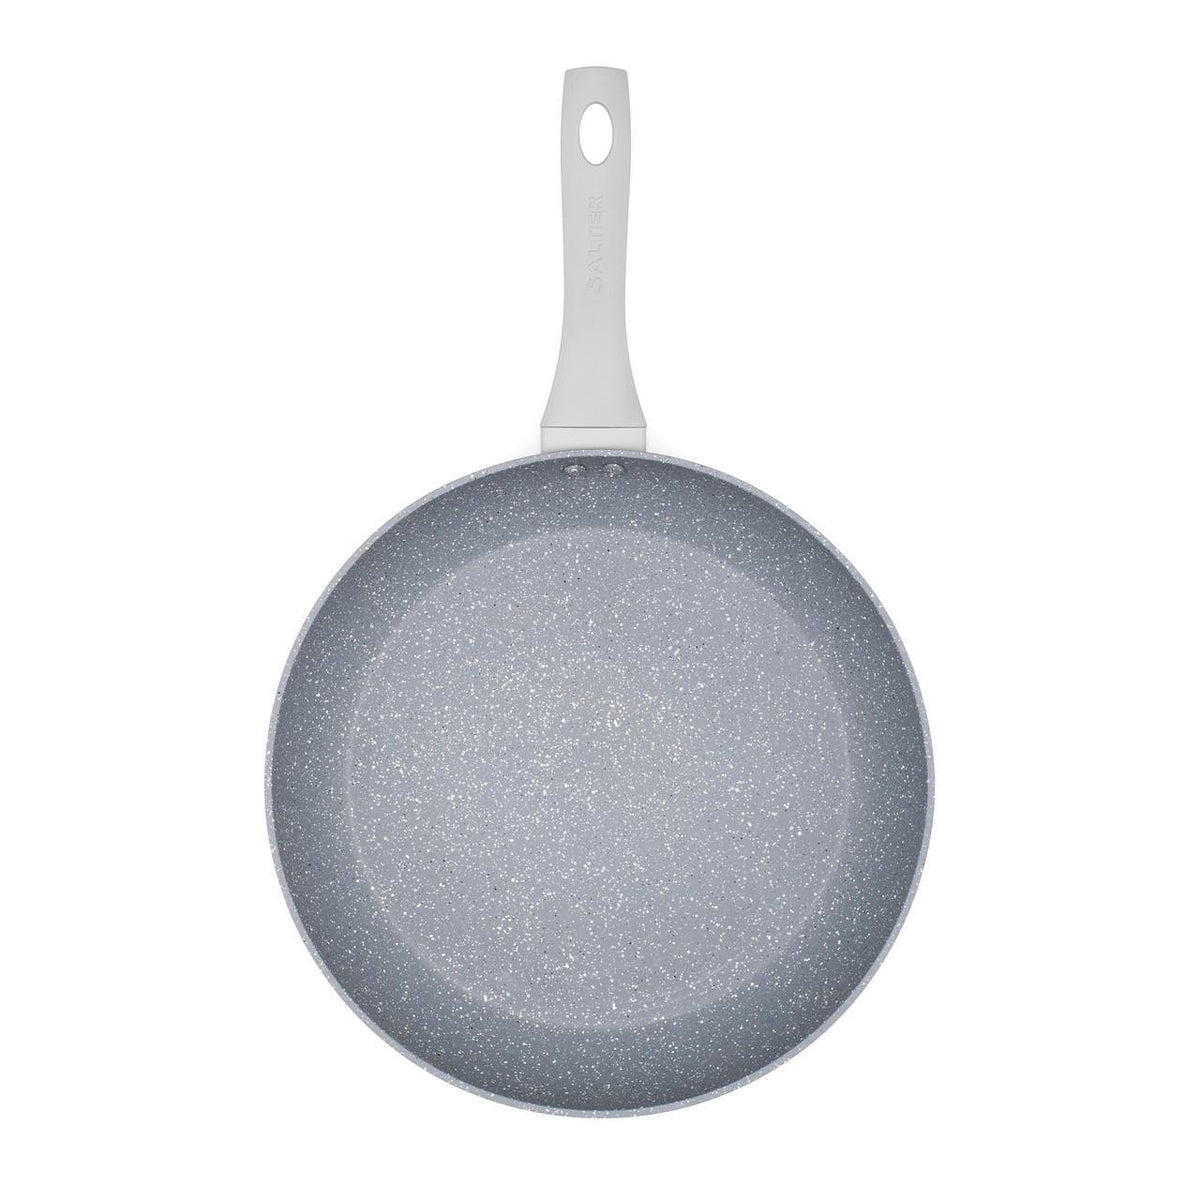 Salter Marblestone Non-Stick Frying Pan | 32cm - Choice Stores